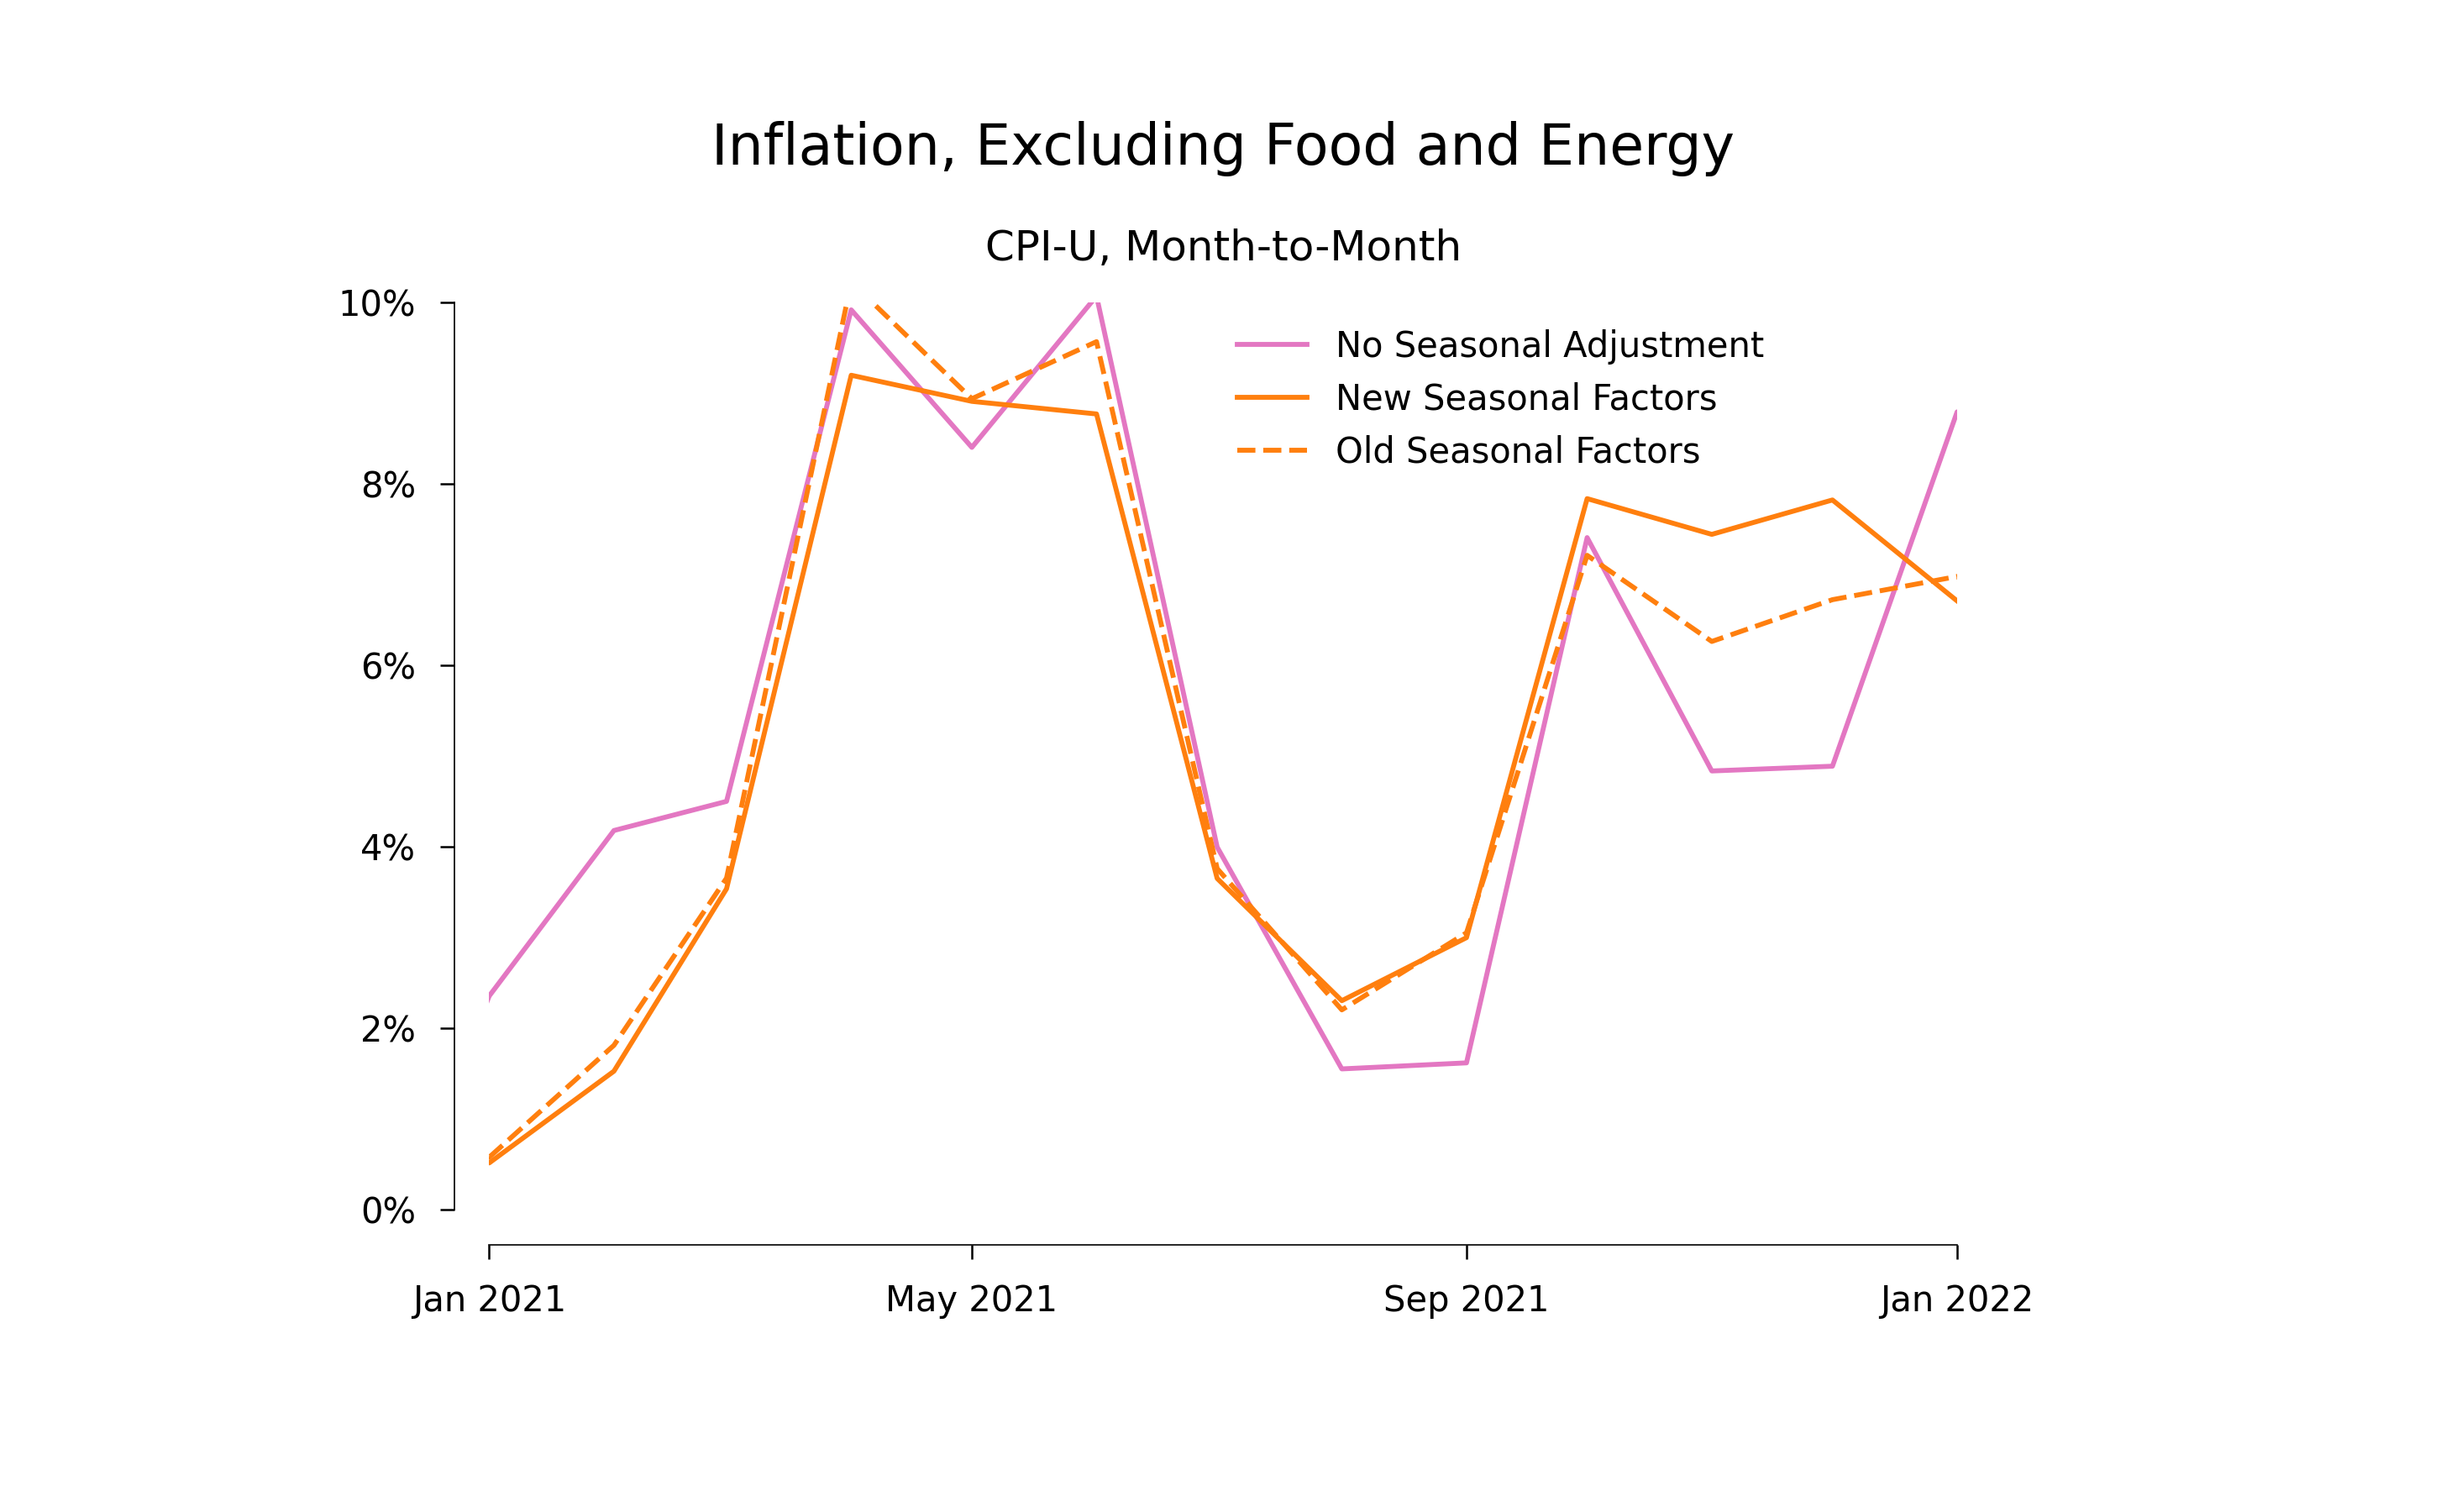 Inflation during 2021, not seasonally adjusted